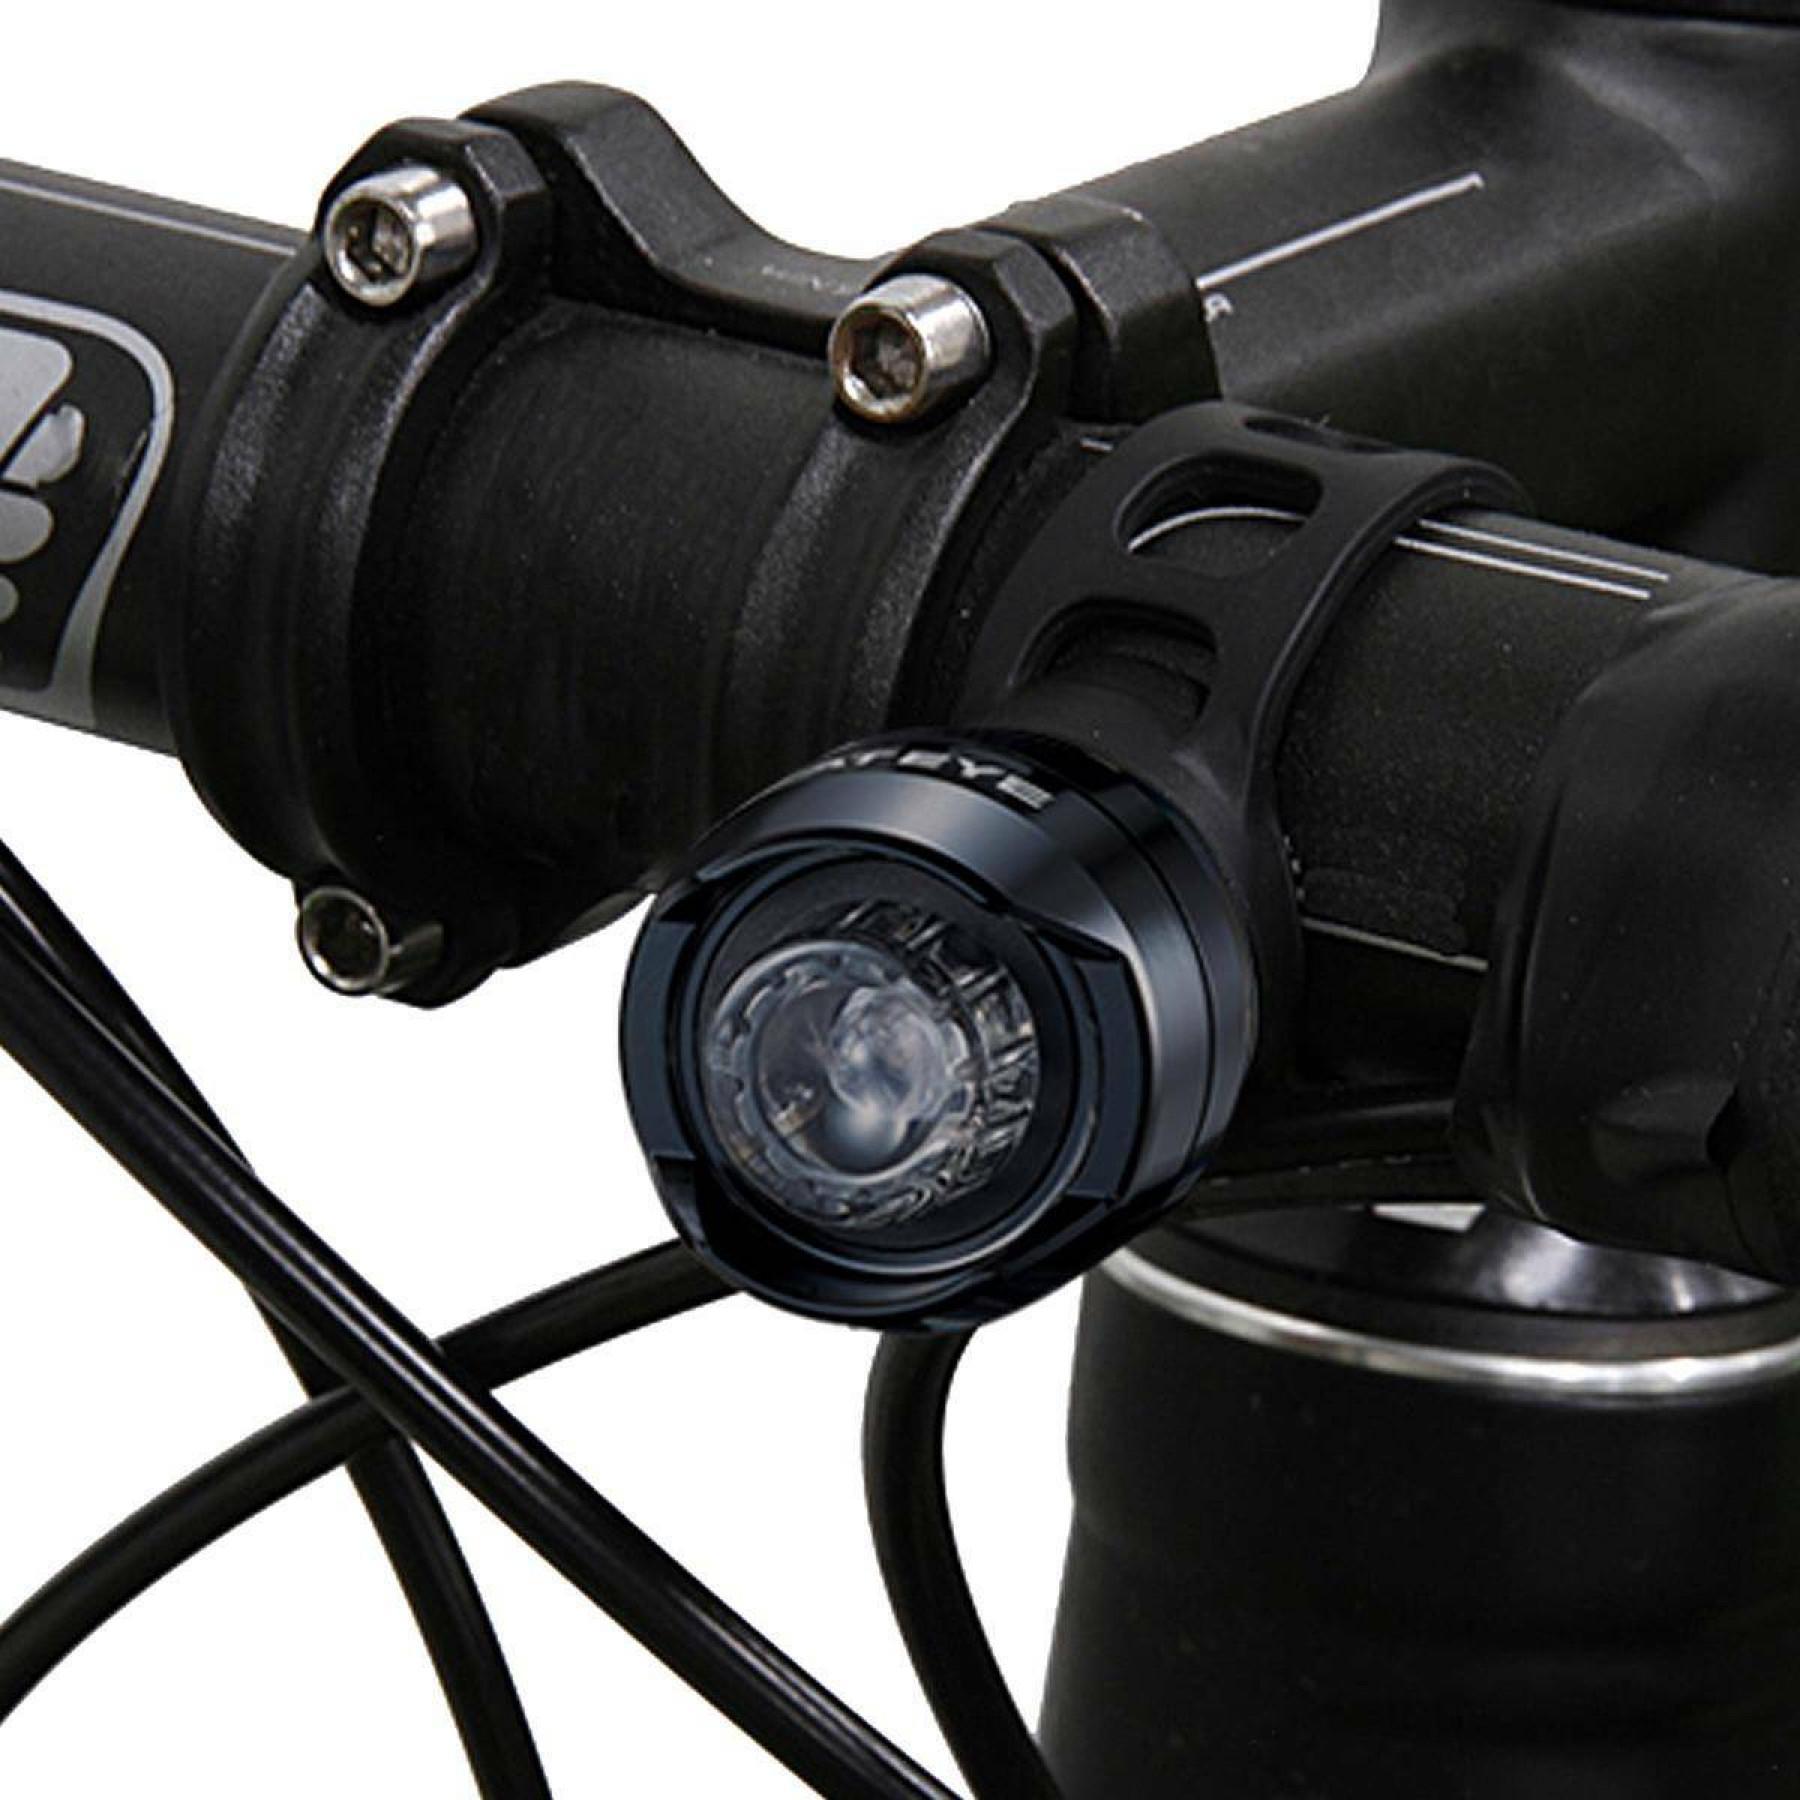 front lighting Cateye Orb rechargeable